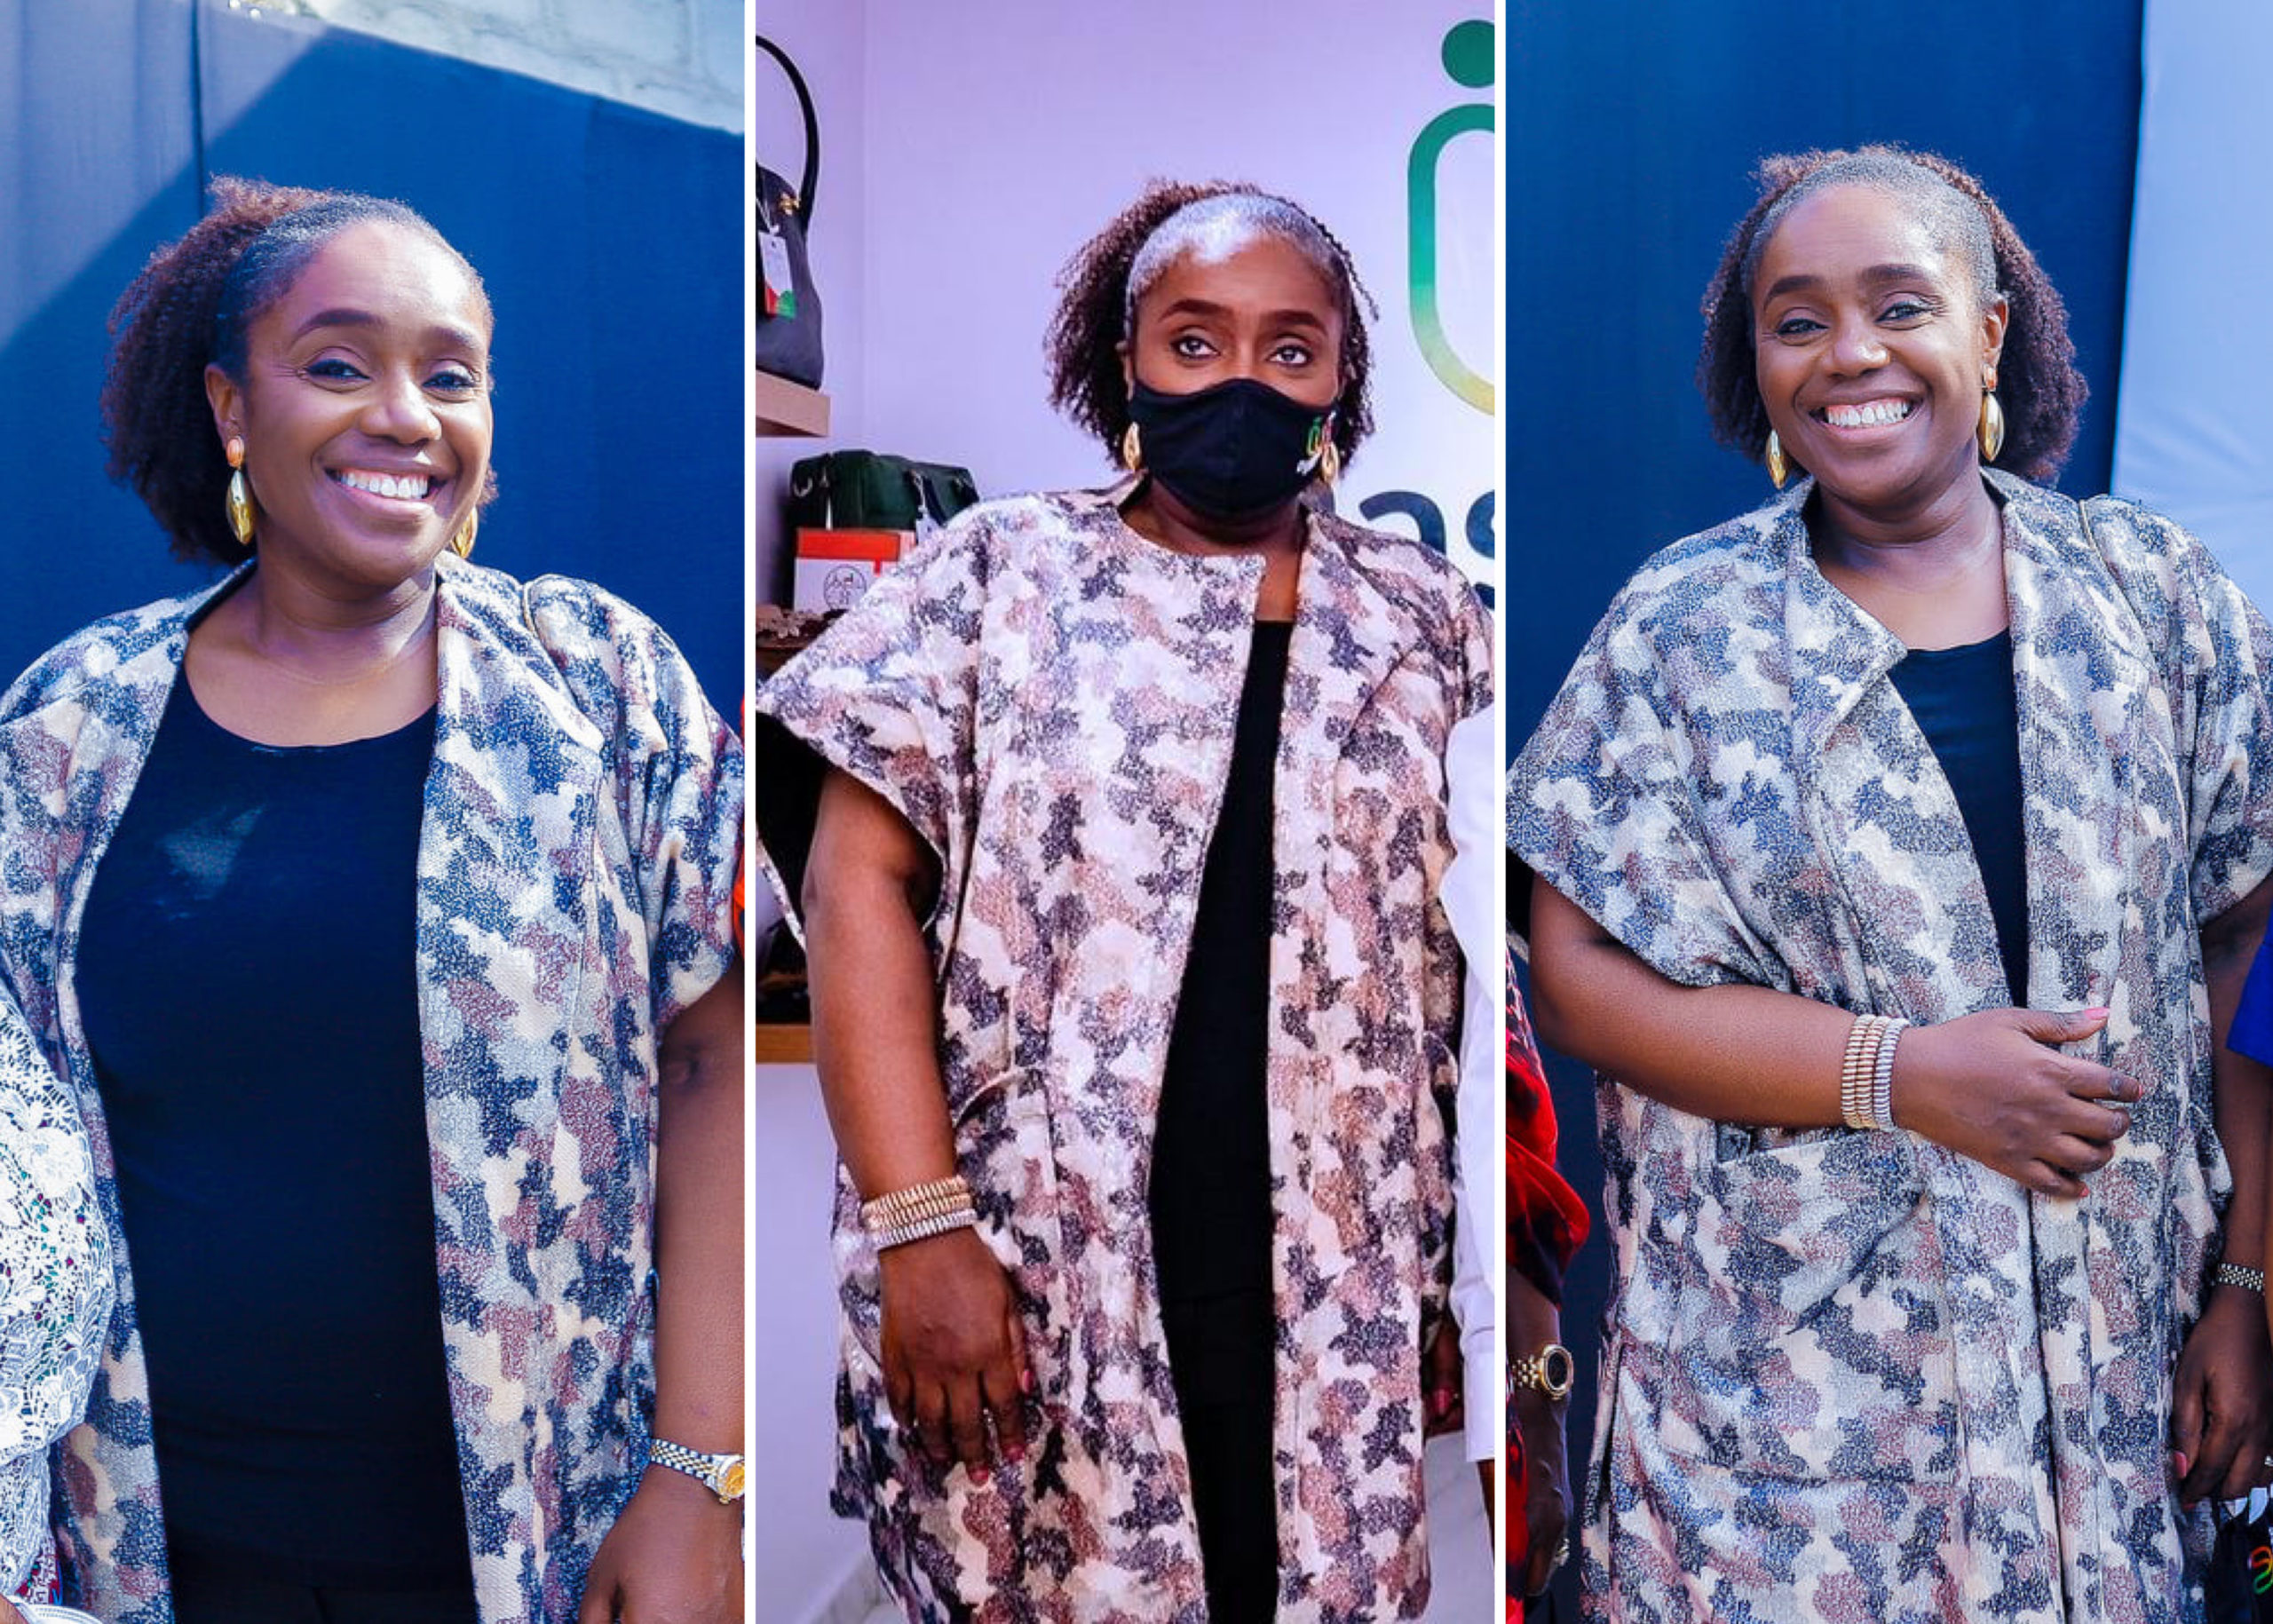 NYSC Scandal: Ex-Finance Minister, Kemi Adeosun Resurfaces Years After Resignation To Launch Online Thrift-For-Charity Initiative